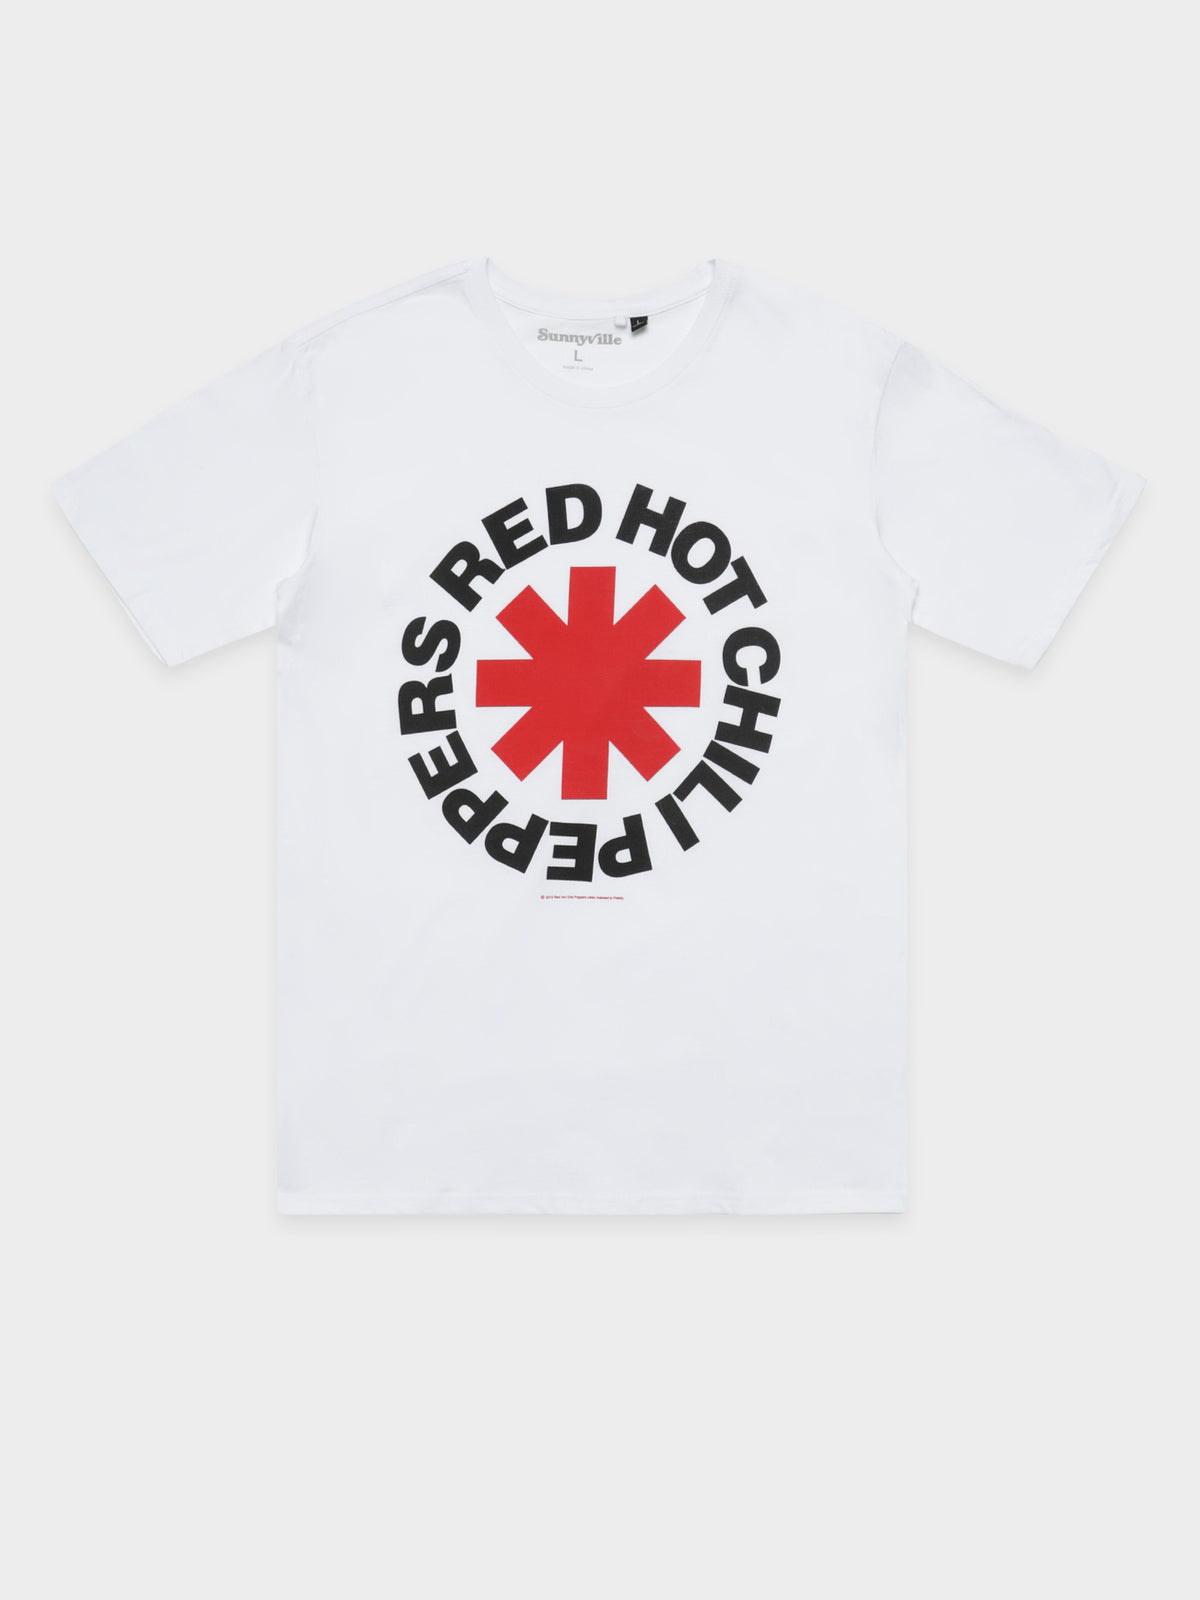 Red Hot Chilli Peppers Band T-Shirt in White